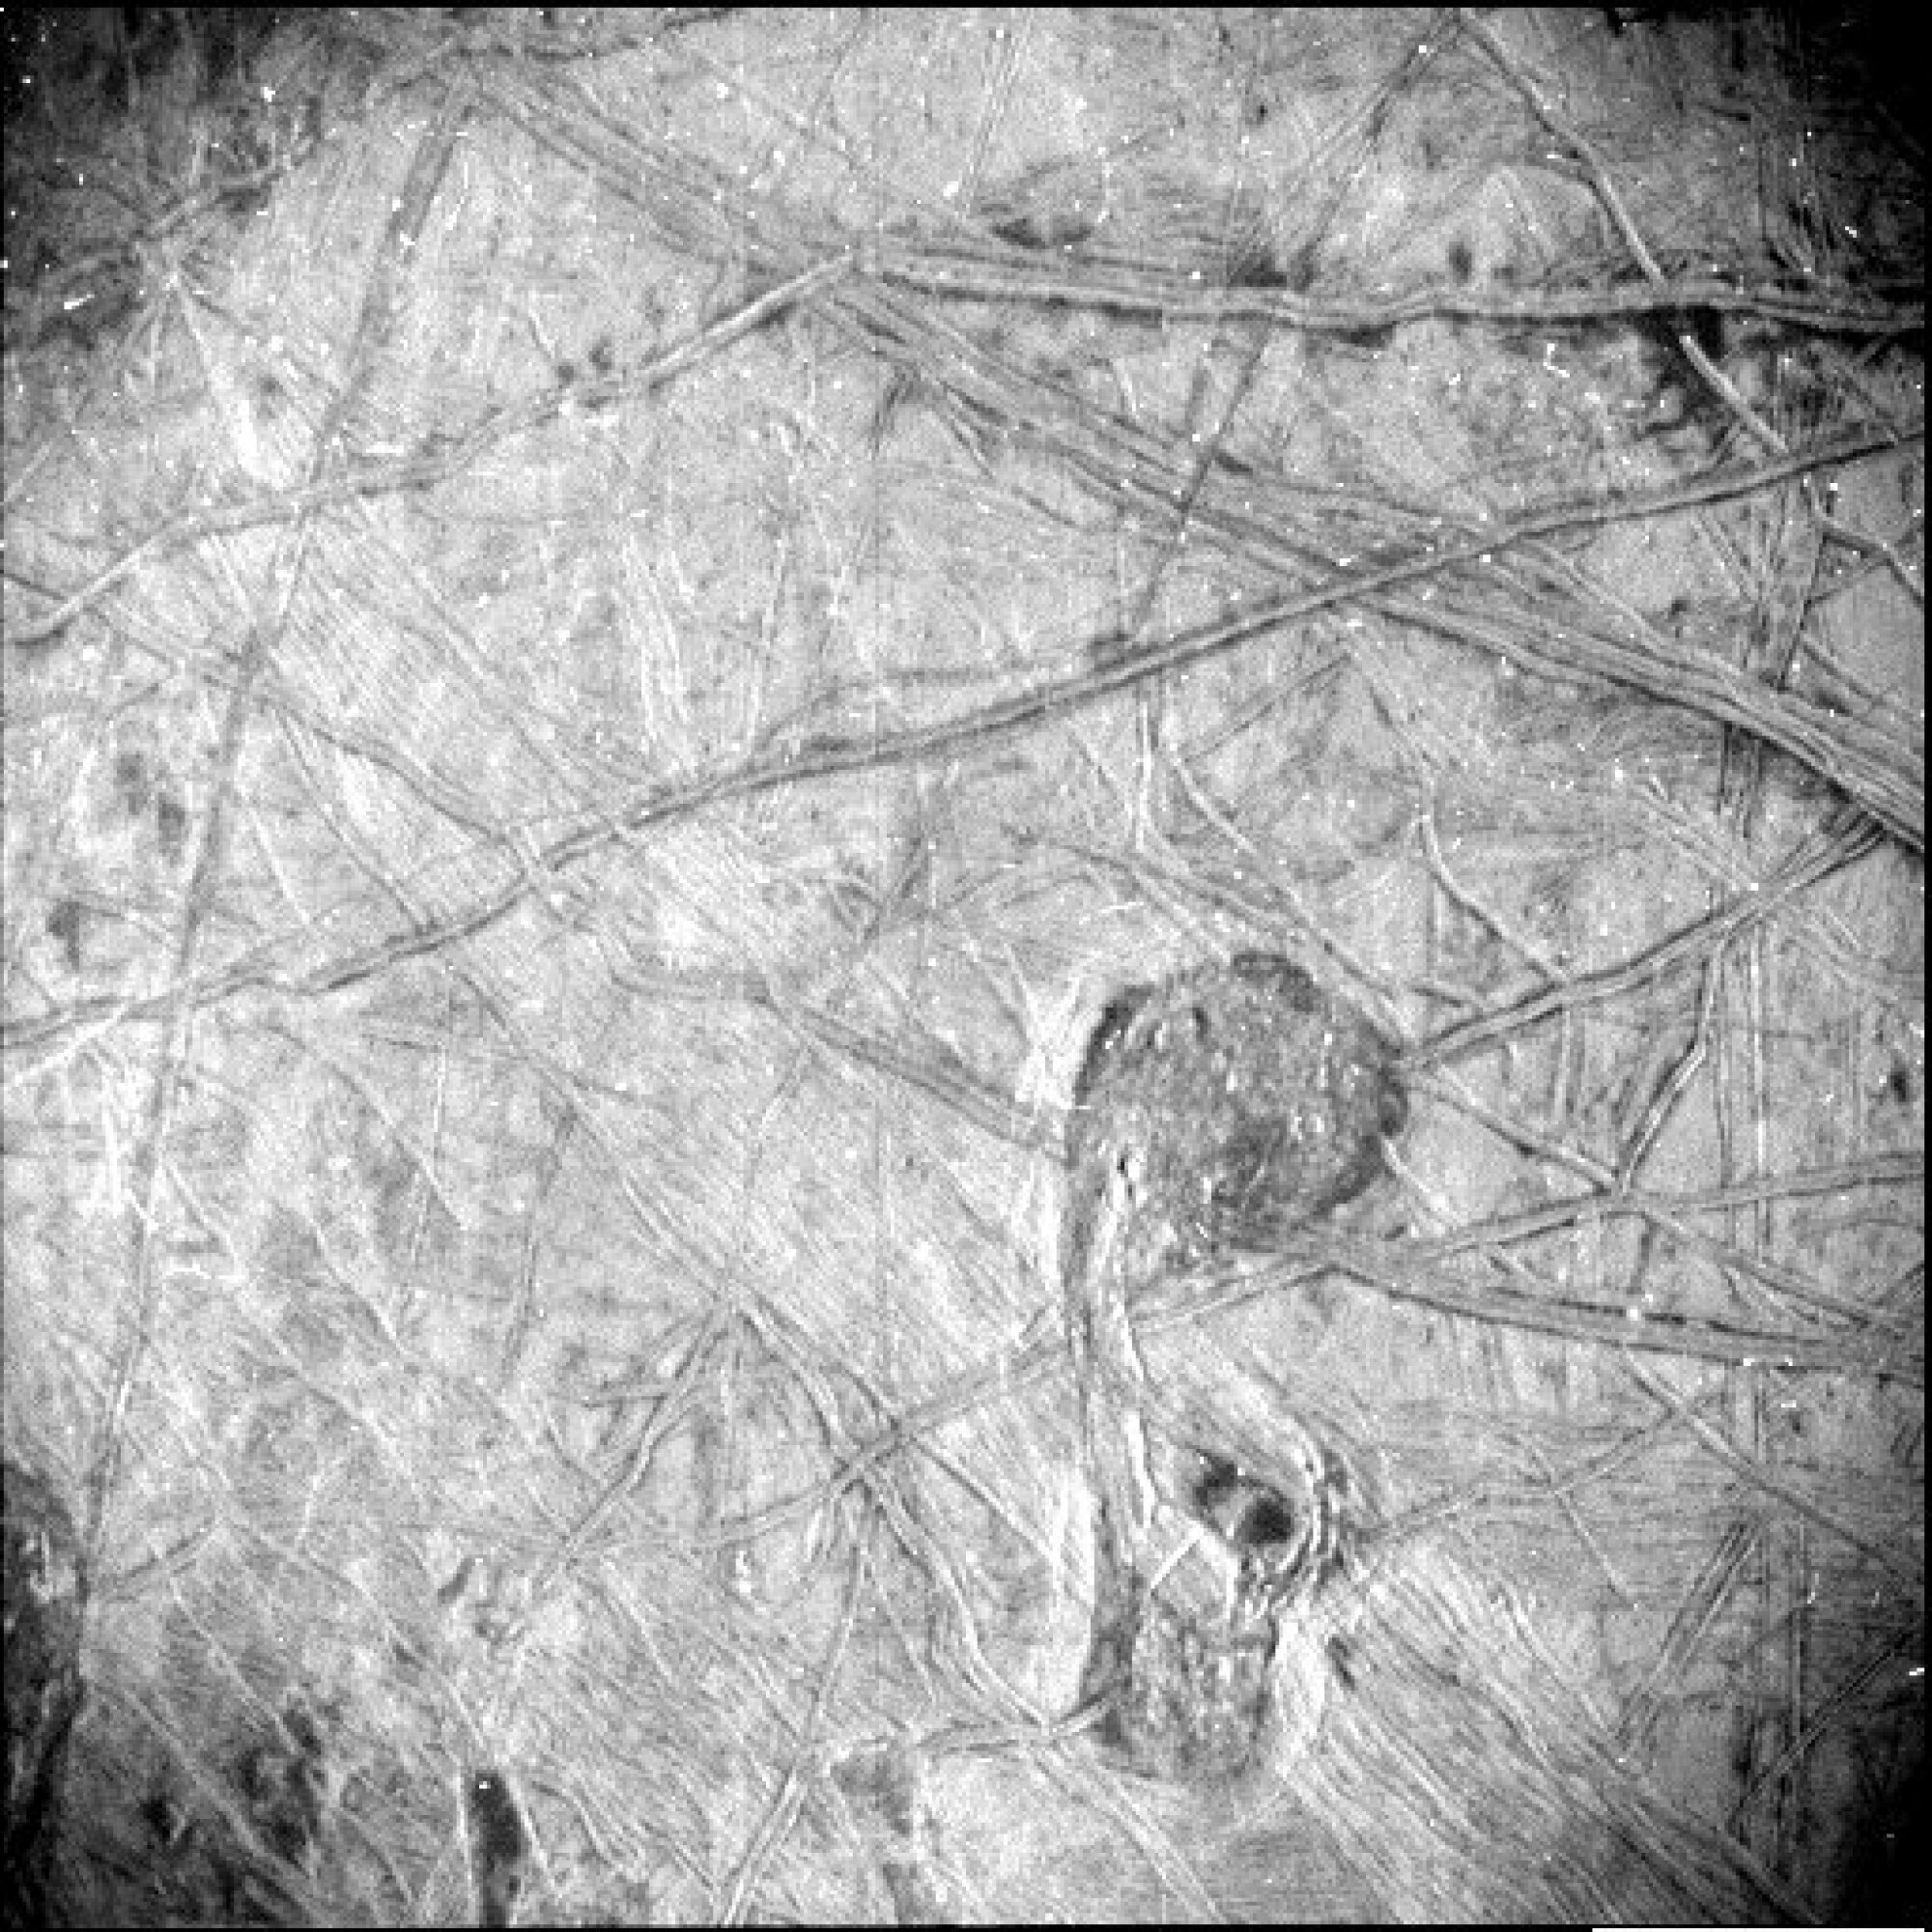 an up-close view of the surface of Jupiter's moon Europa